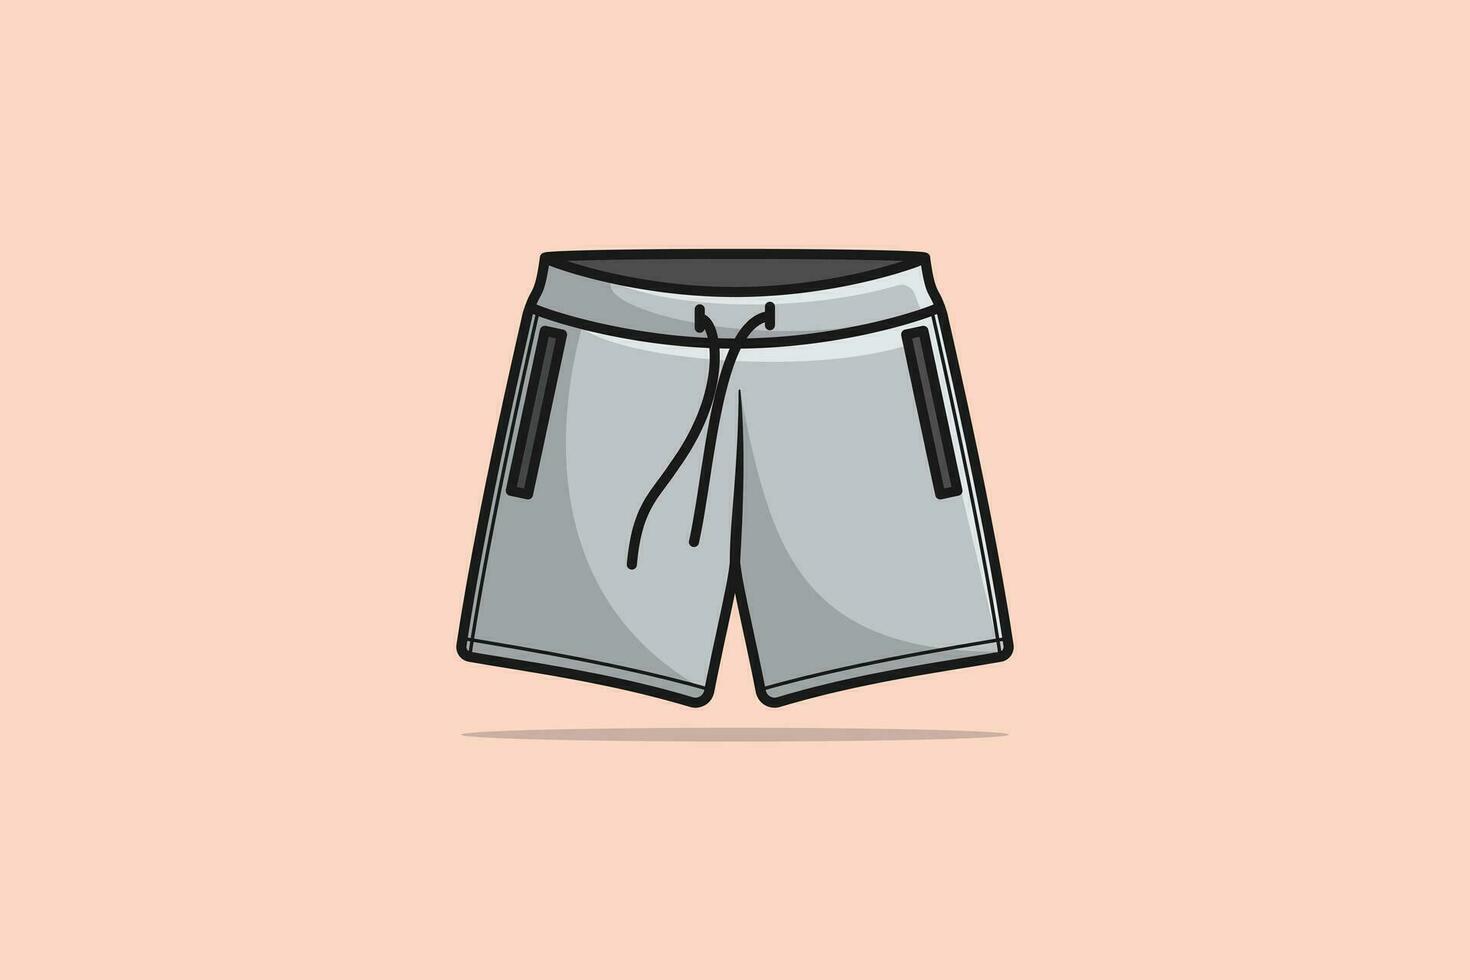 Men Active Shorts With Compression Leggings Inner Tight Shorts vector illustration. Fashion objects icon concept. Boys swimming short knicker vector design with shadow.